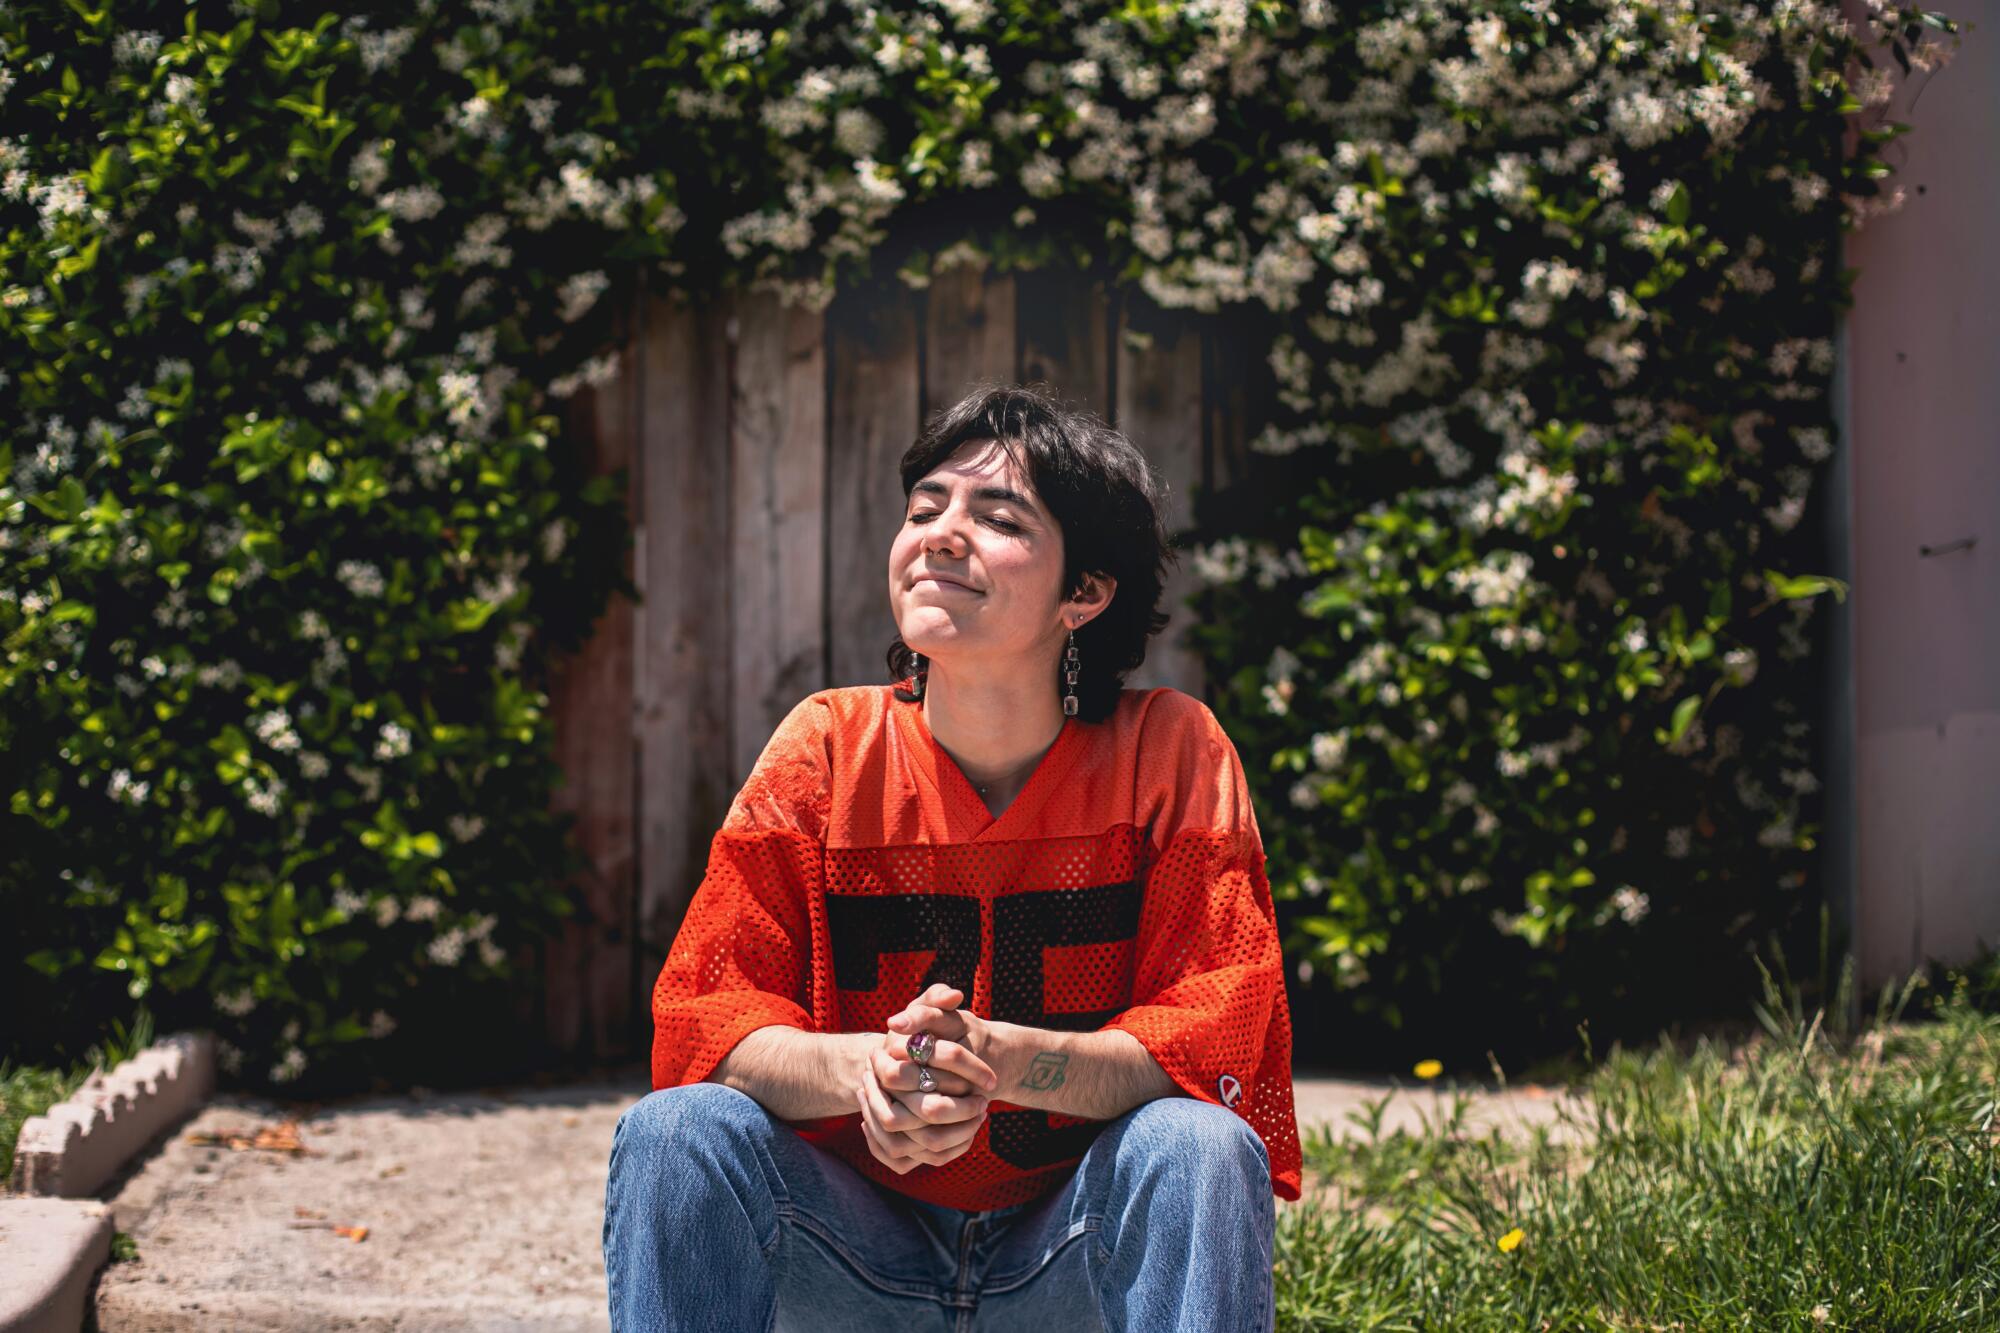 A person in red shirt and jeans sits outdoors in the sunshine, eyes closed, looking up